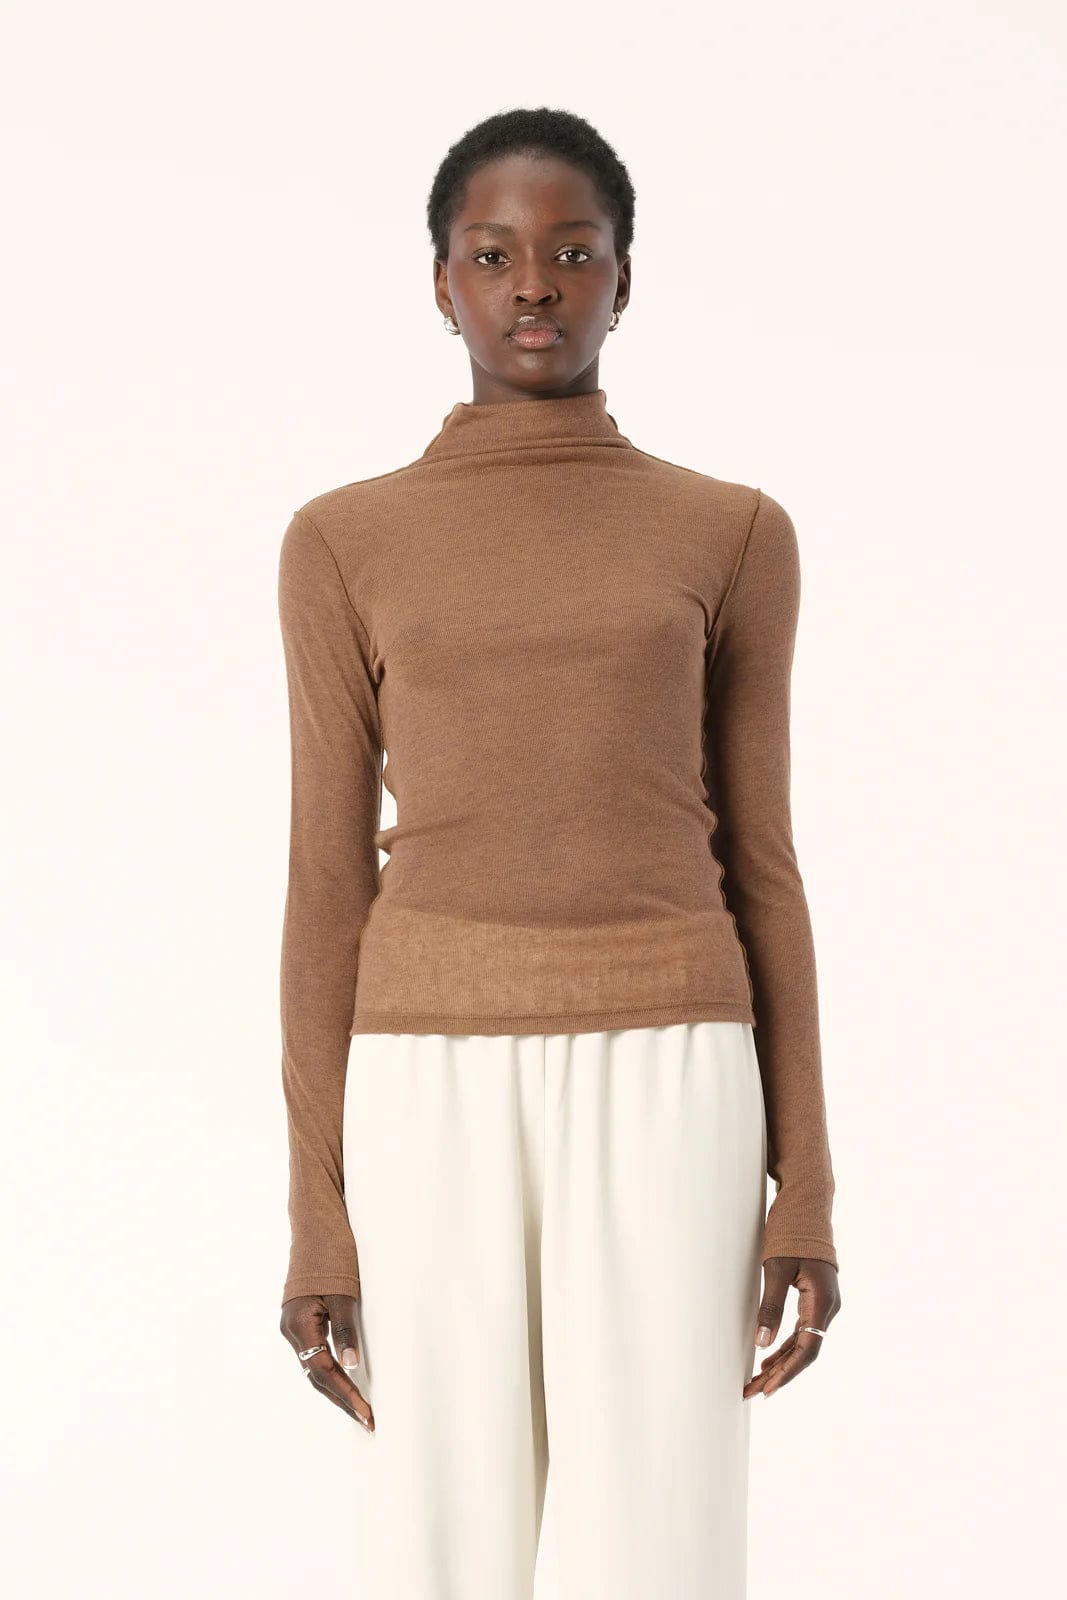 Elka Collective Tops - Long Sleeve Elka Collective | Remi Top - Camel Marle